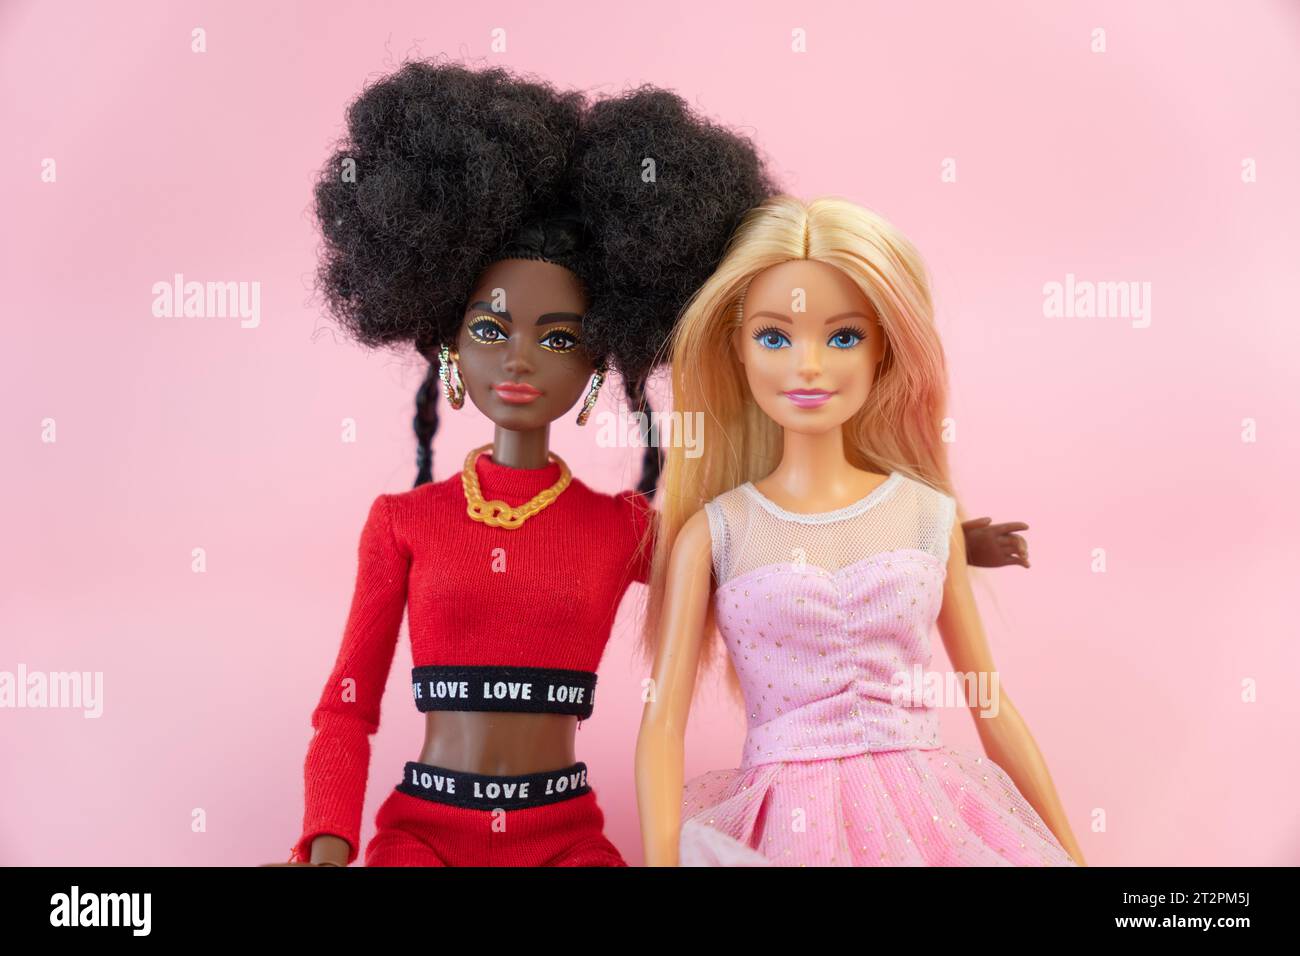 October 9, 2023. Barnaul, Russia: two dolls, a blonde barbie and her African-American friend on a pink background. Stock Photo